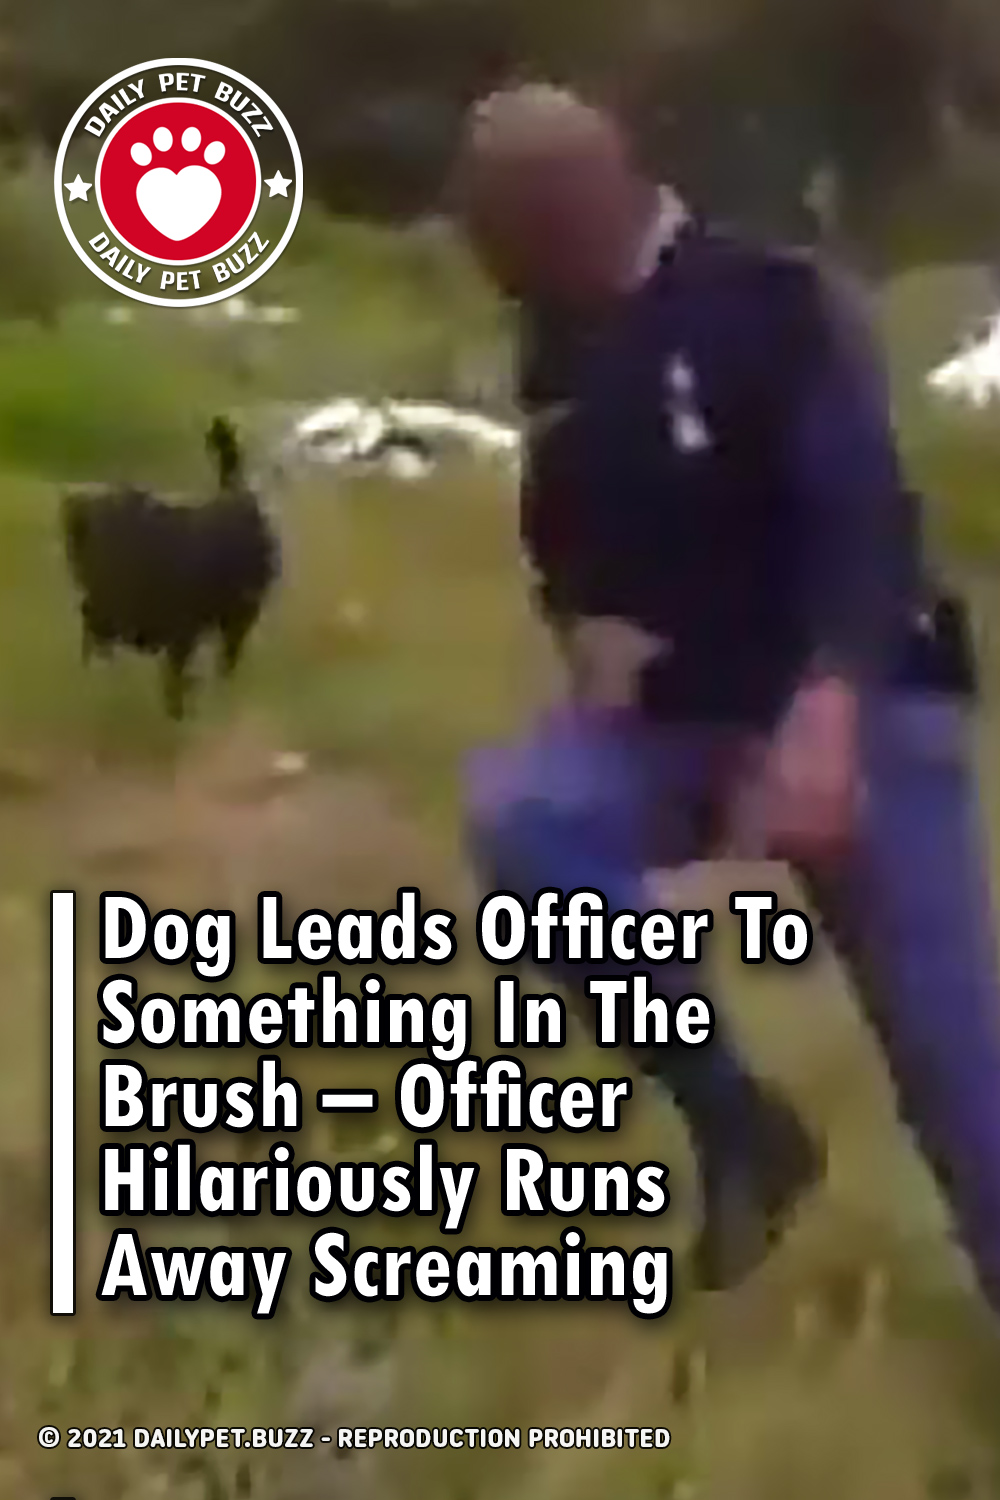 Dog Leads Officer To Something In The Brush – Officer Hilariously Runs Away Screaming